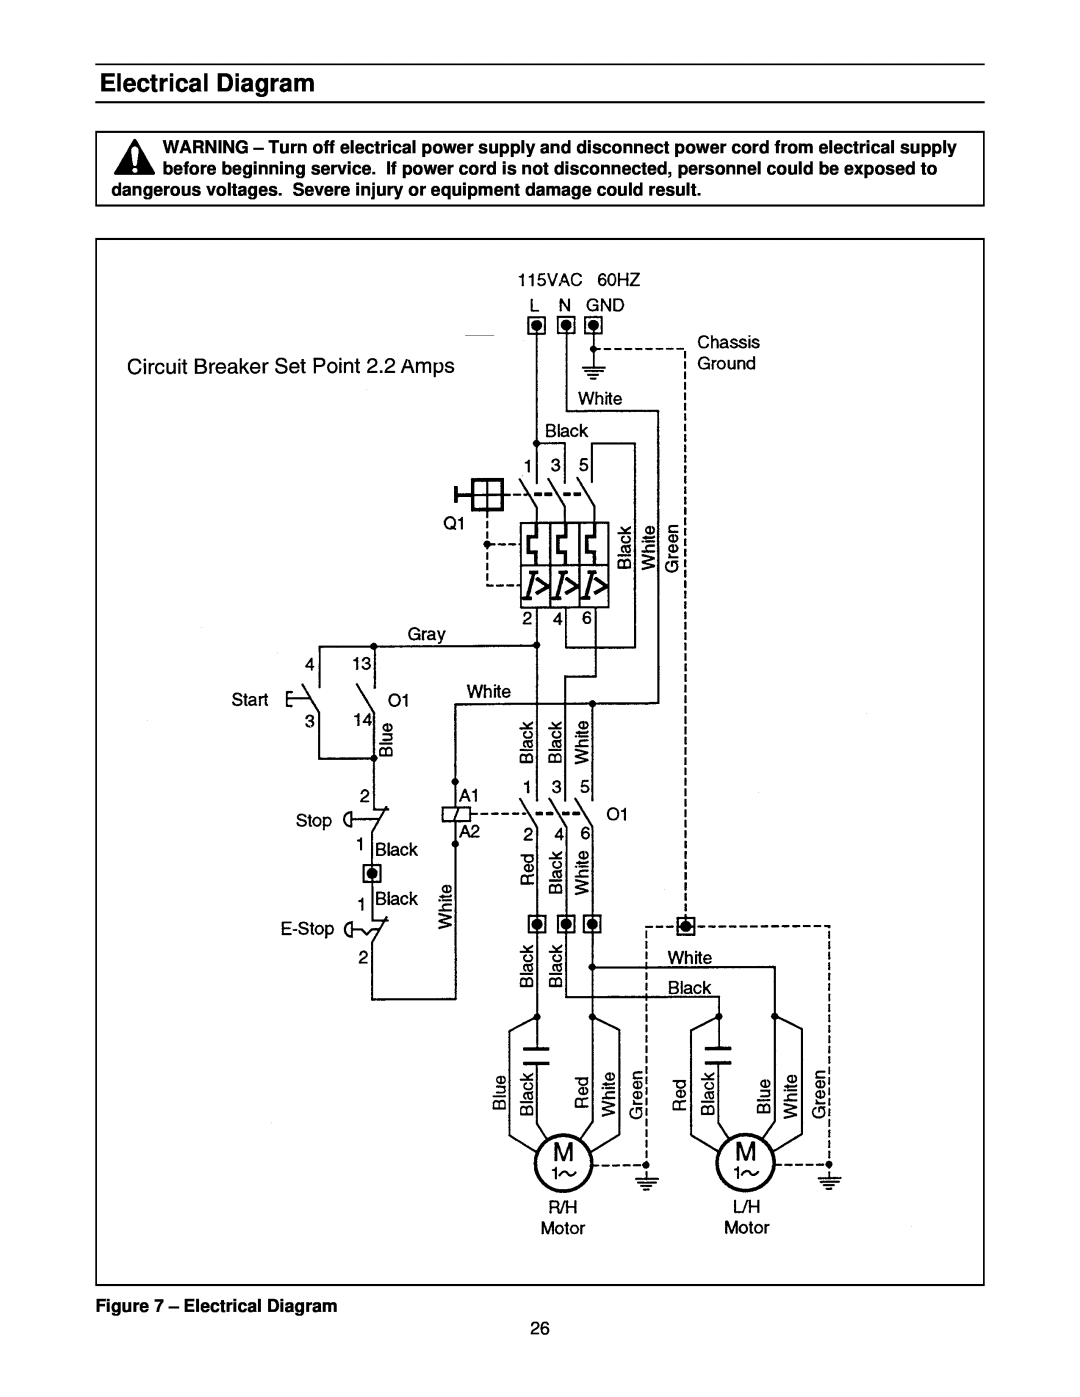 3M 800ab 39600 manual Electrical Diagram, dangerous voltages. Severe injury or equipment damage could result 